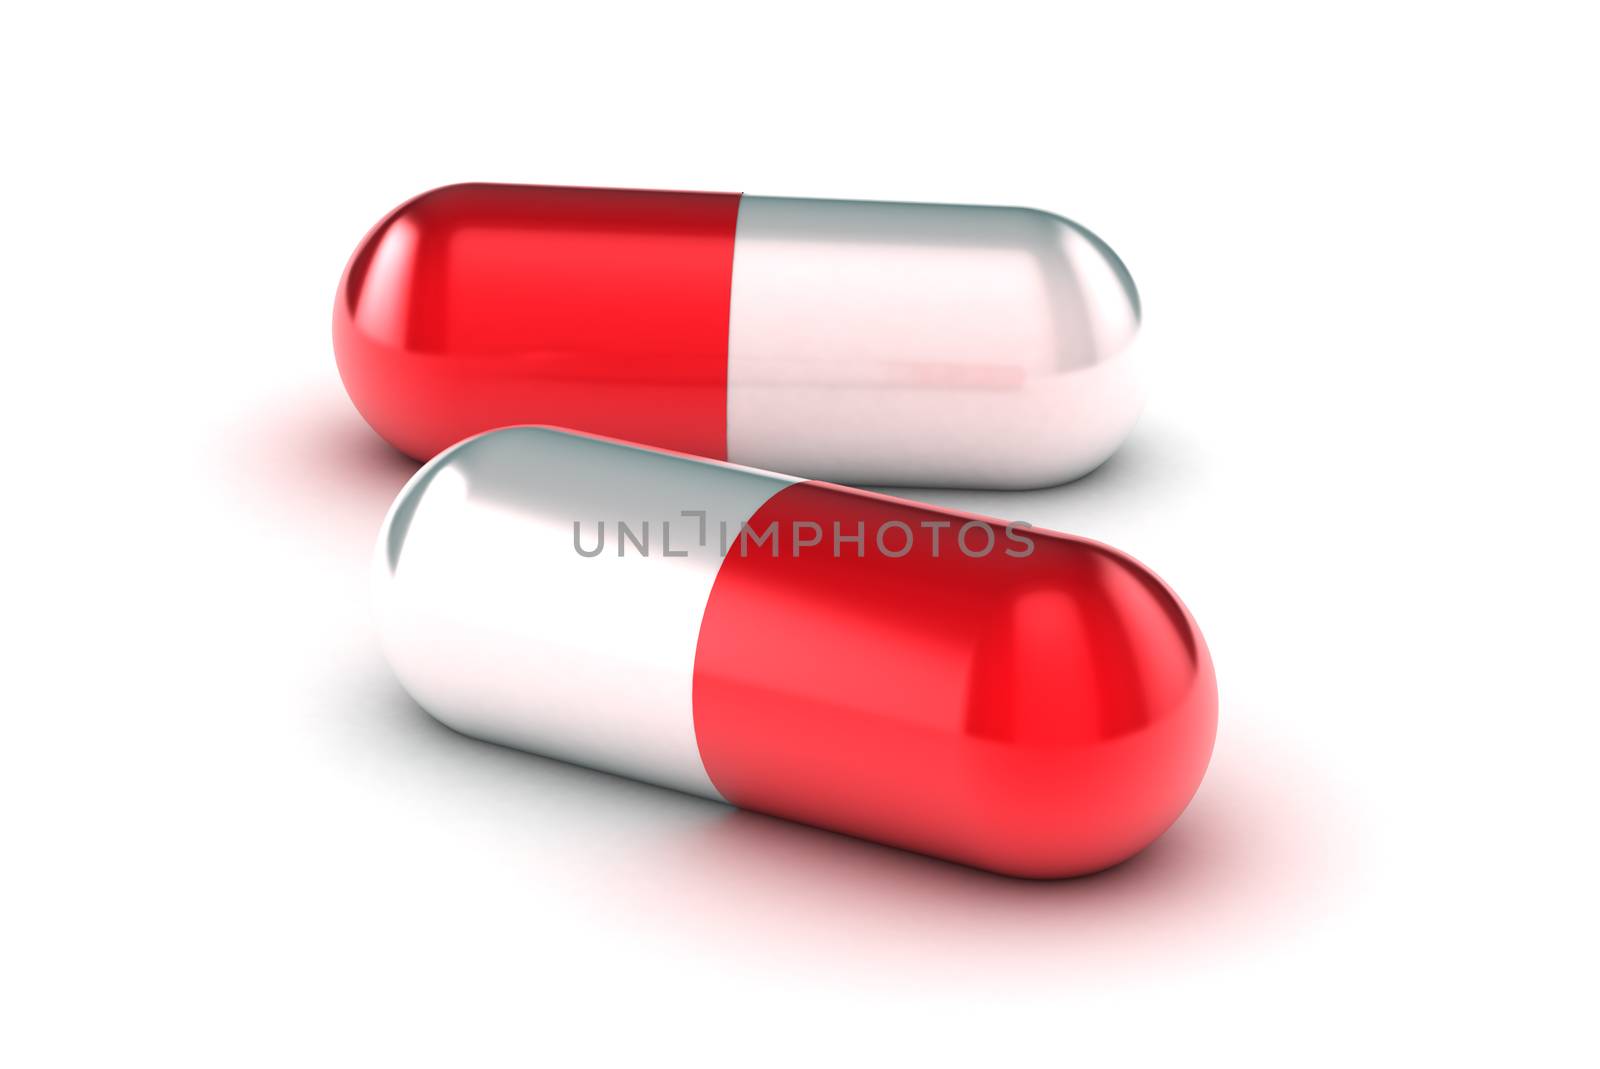 An Illustration of a Group of Red and White Medical Pills on a white background